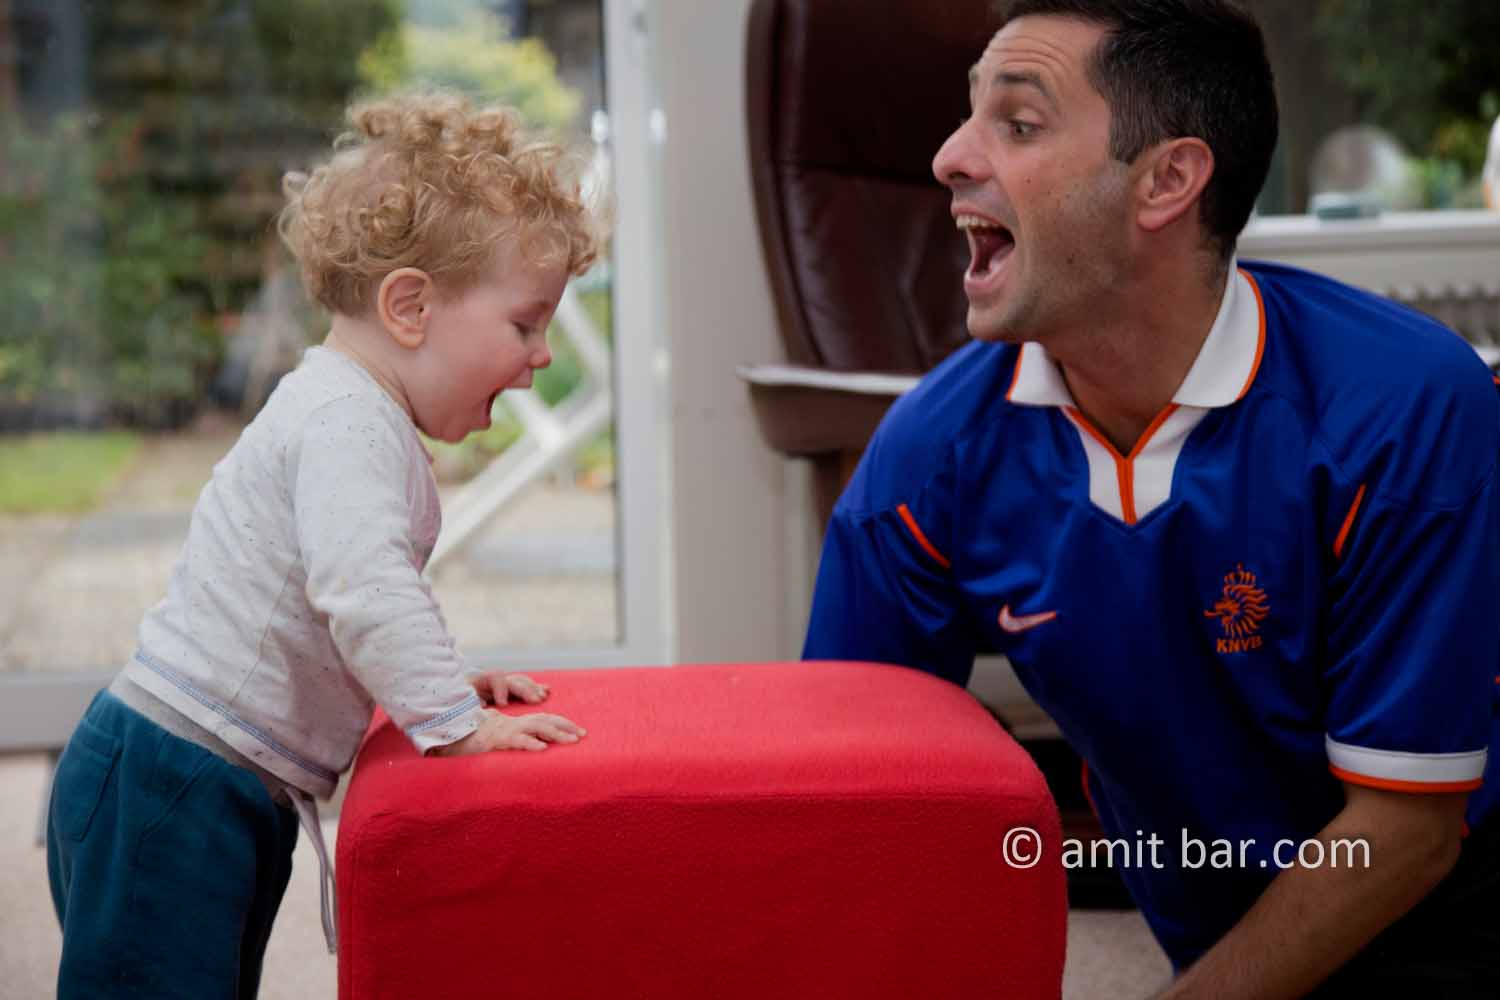 Roaring: A baby and his uncle having fun